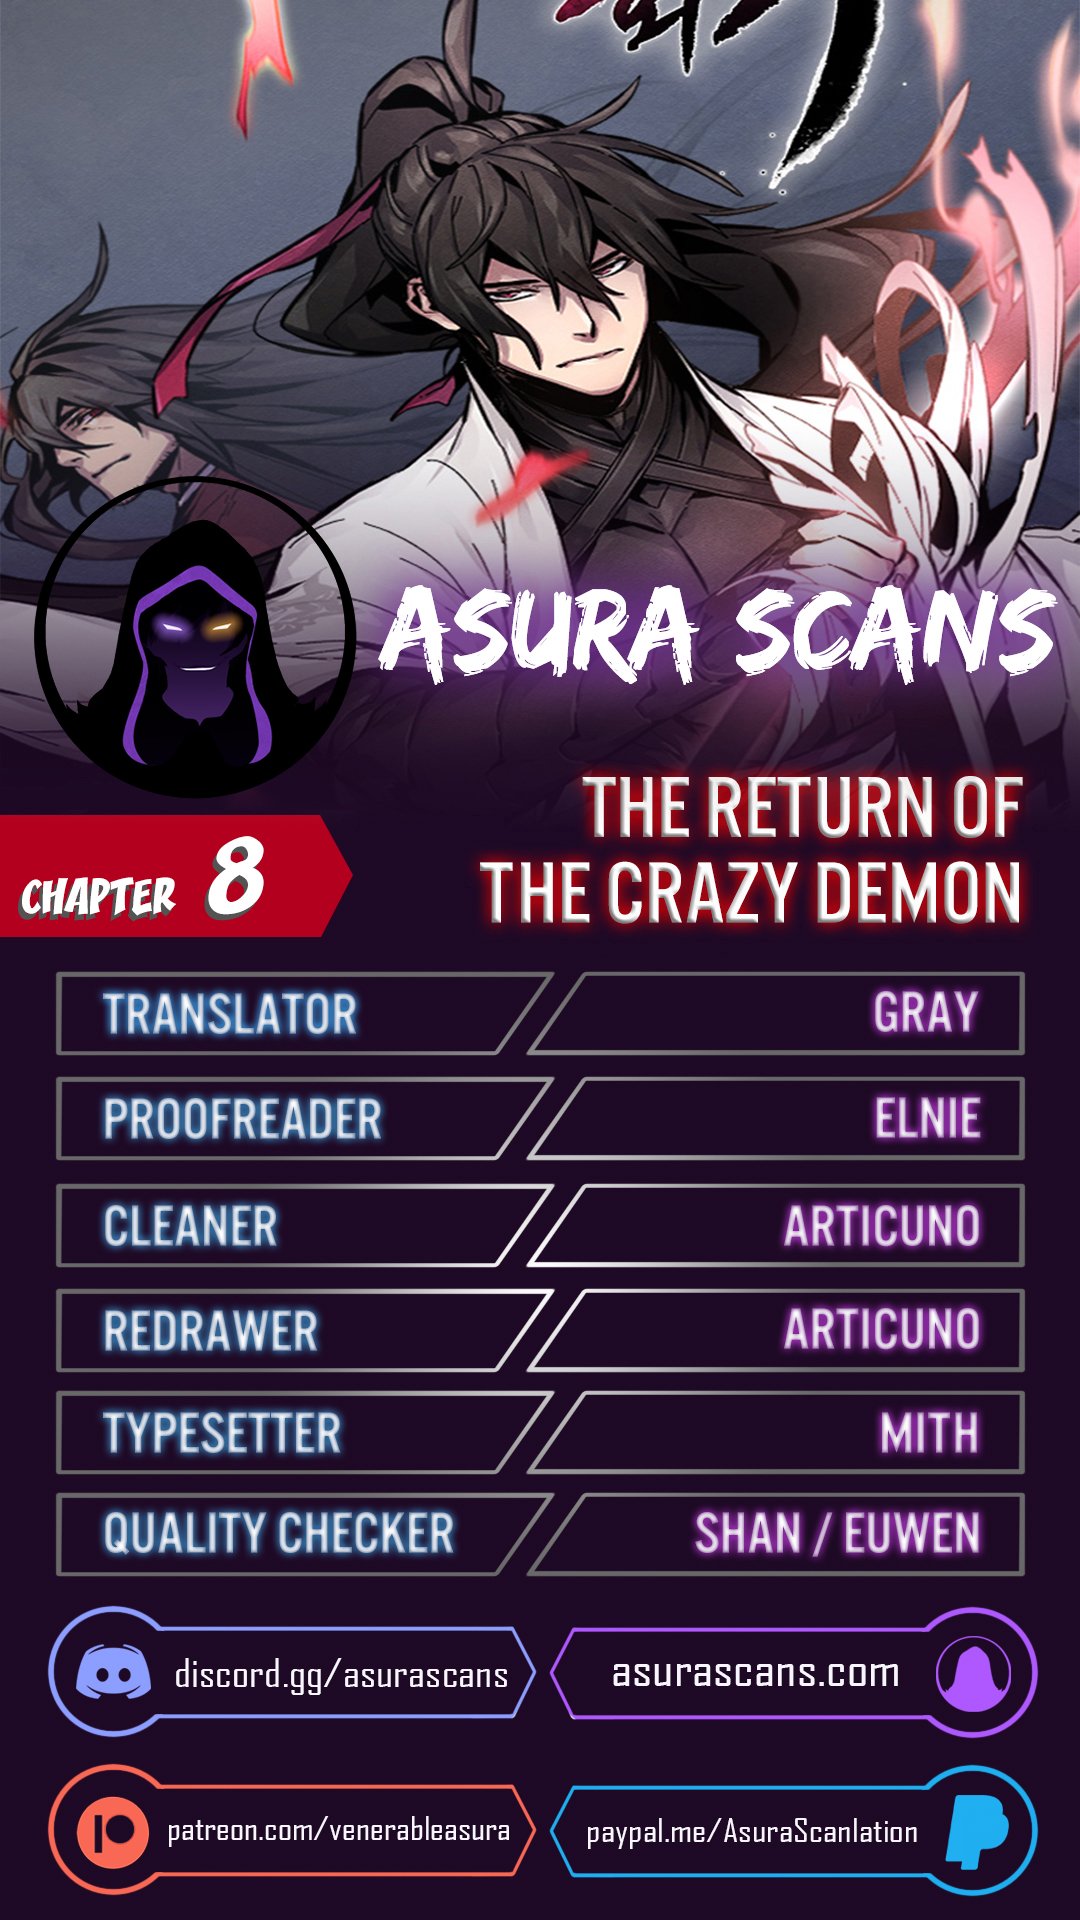 The Return of the Crazy Demon - Chapter 18549 - Image 1